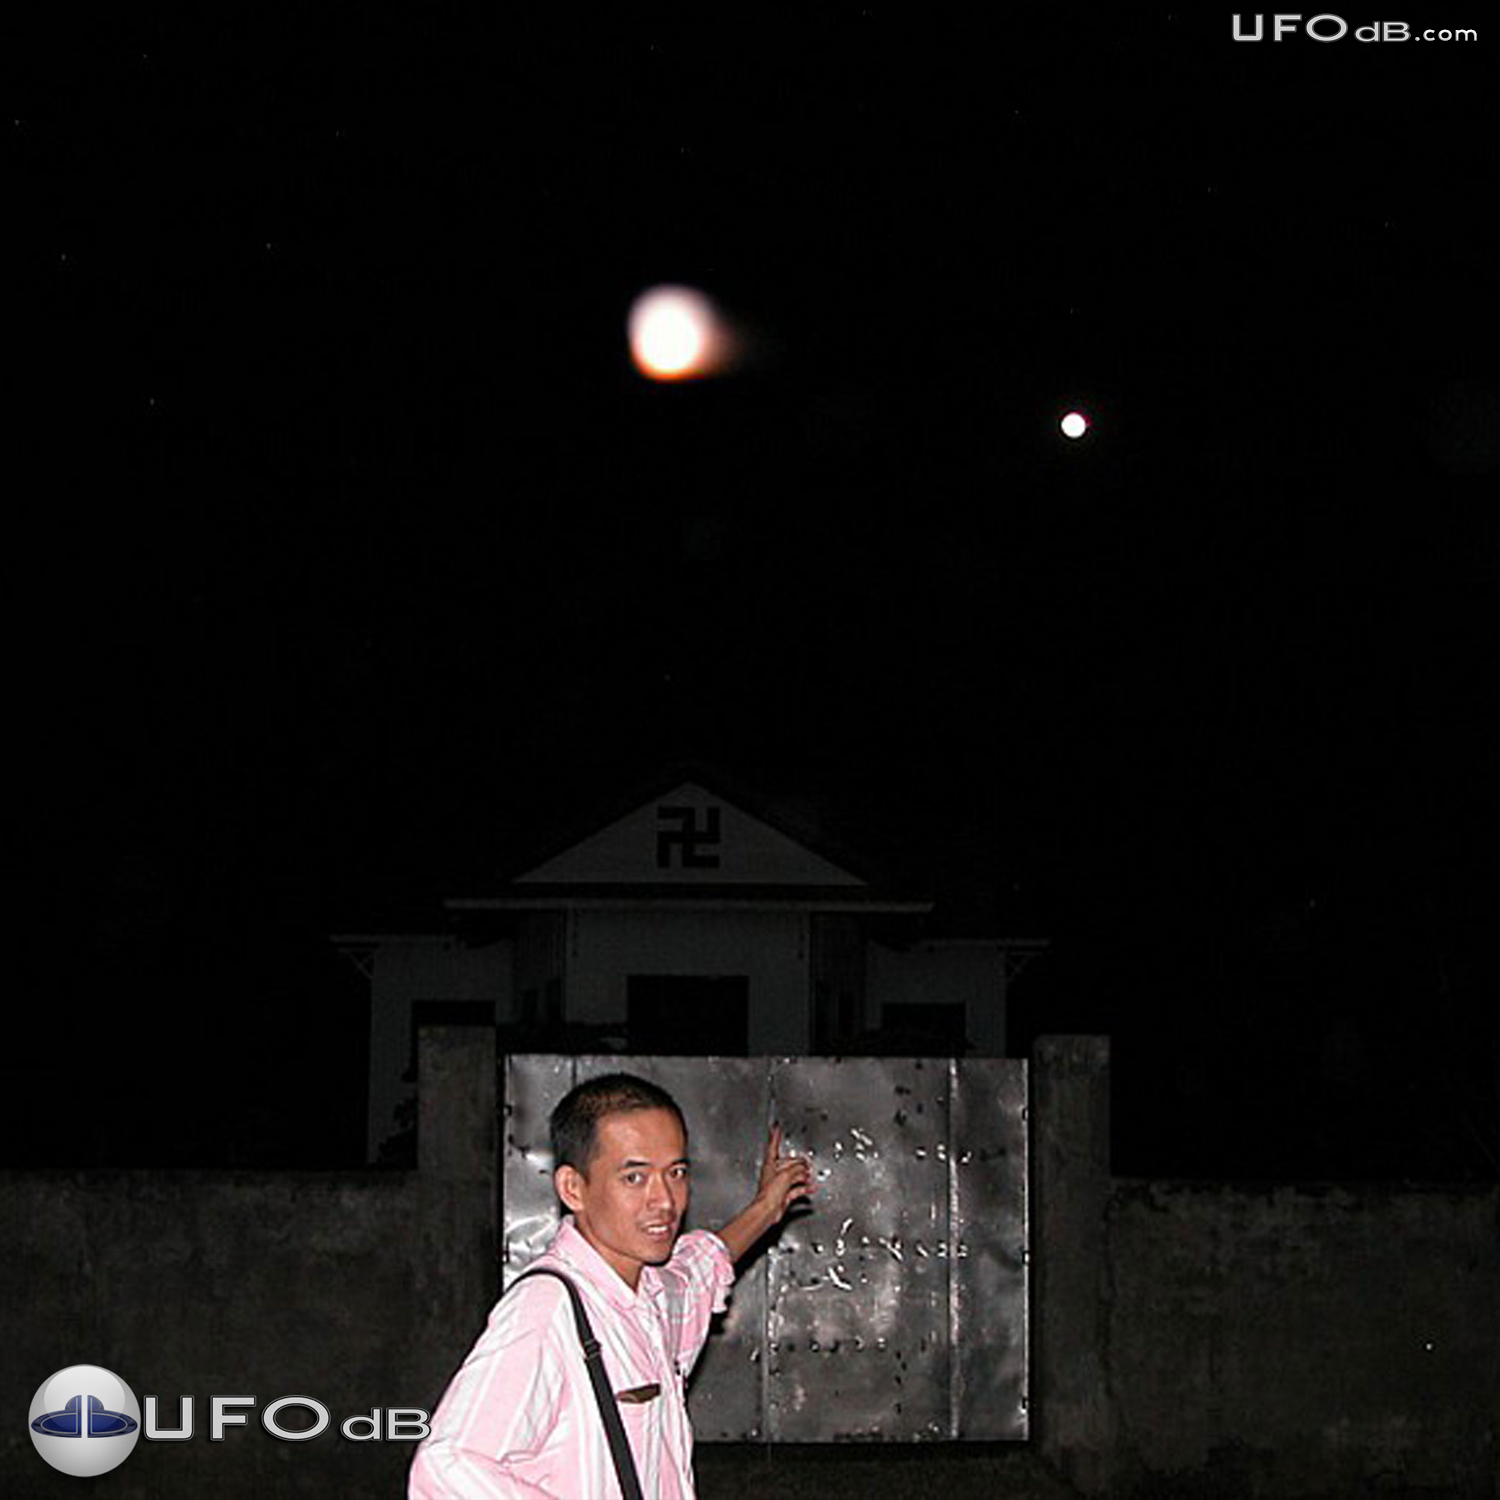 Unidentified round light UFO caught on picture in Phonm Penh, Cambodia UFO Picture #360-1